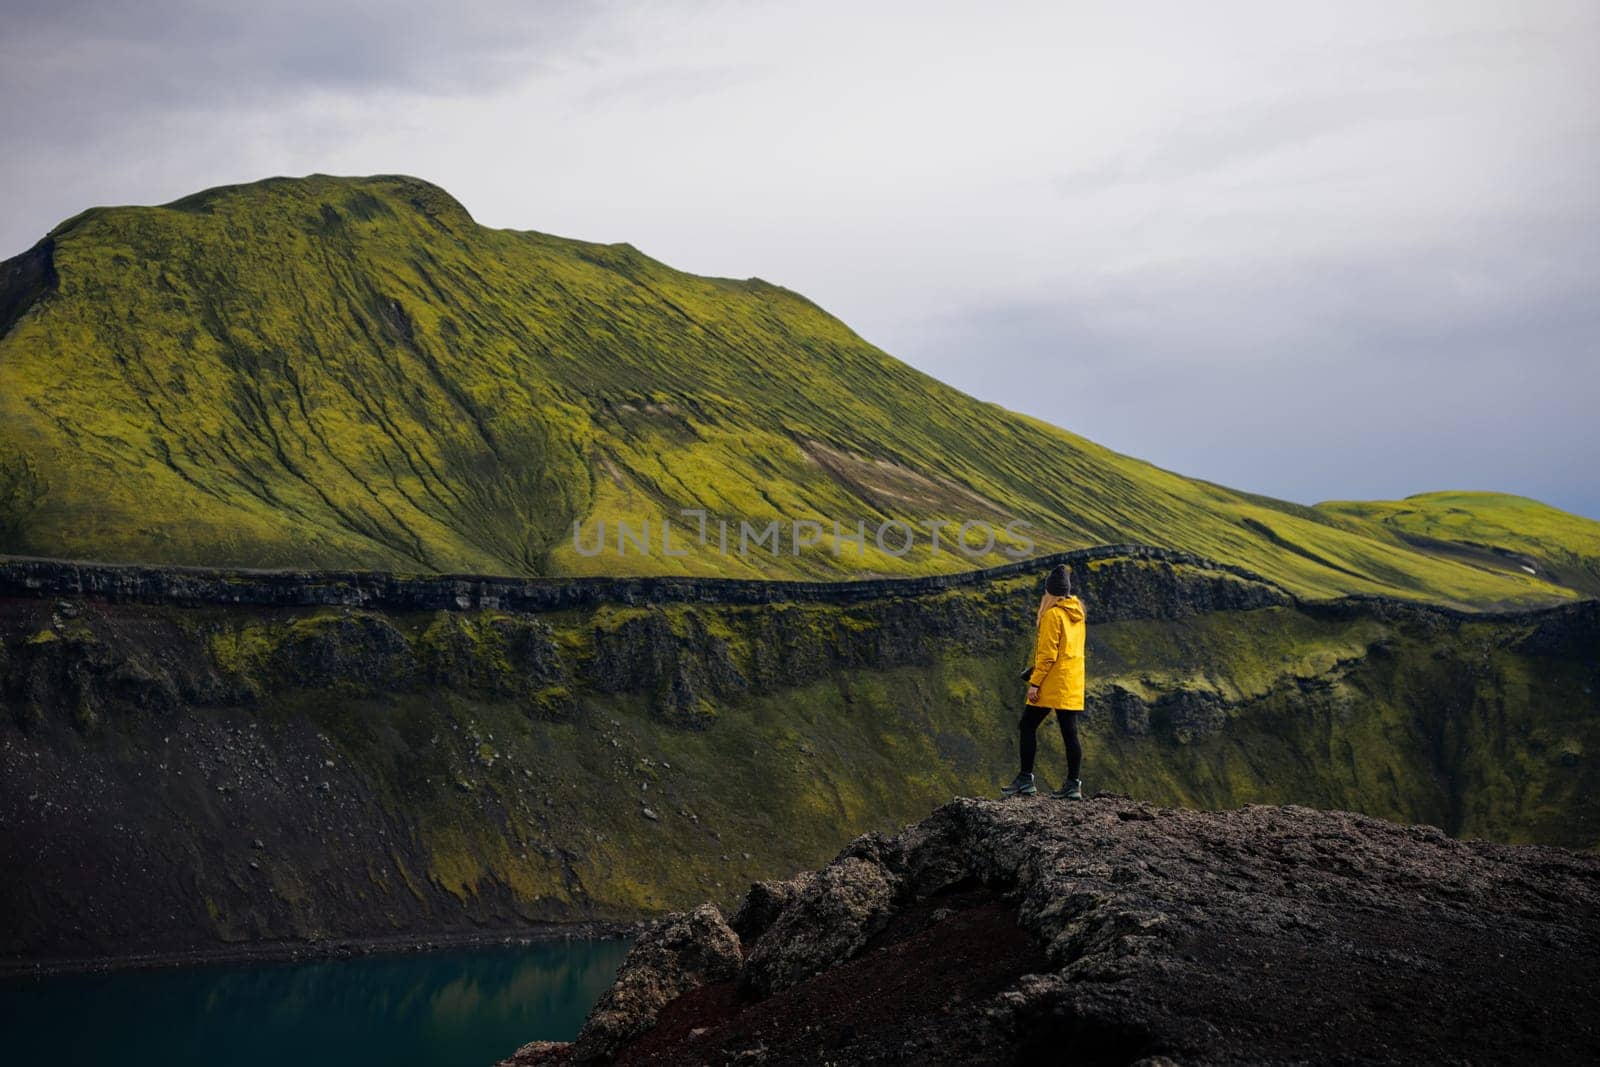 This photo shows a backpacker girl taking in the view of Blahylur lake in Iceland. She is standing on the shore of the lake, looking out at the surrounding mountains and glaciers. The sky is cloudy, creating a sense of drama and suspense. This photo is perfect for use in travel and nature photography. It could be used to illustrate a story about the beauty of Iceland, or it could simply be used to create a sense of awe.